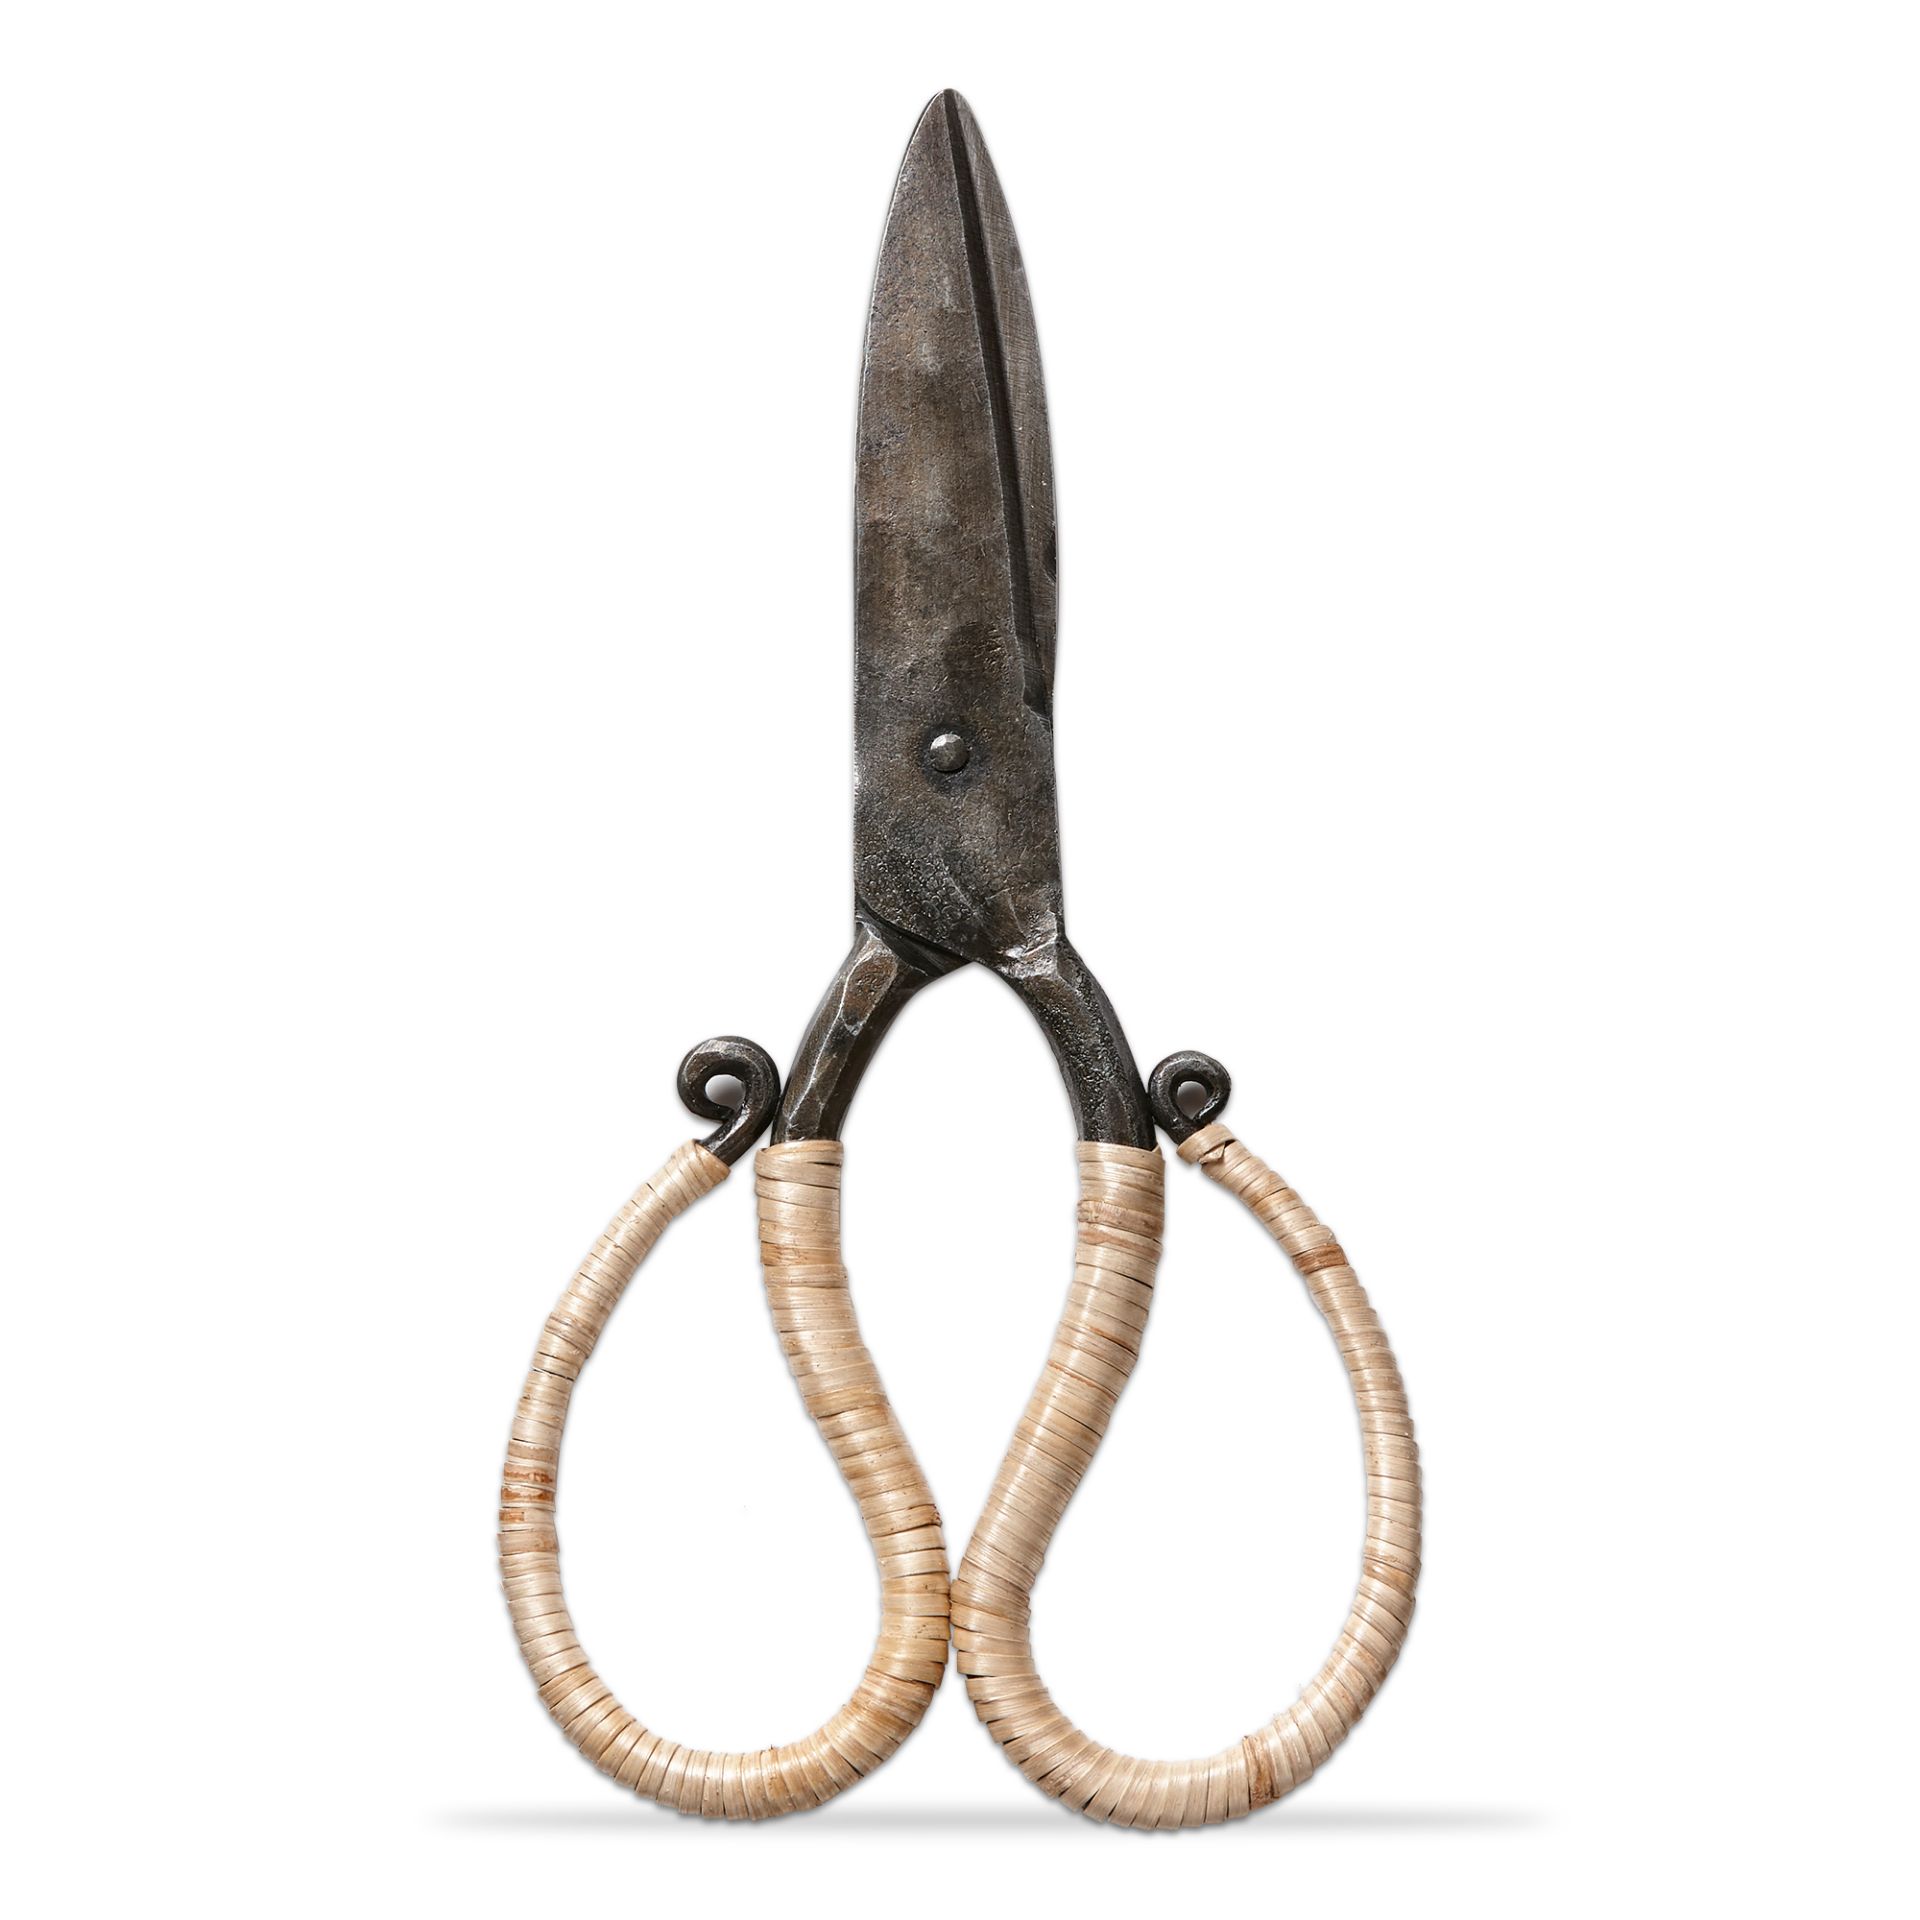 Tag Cane Wrapped Forged Iron Scissors